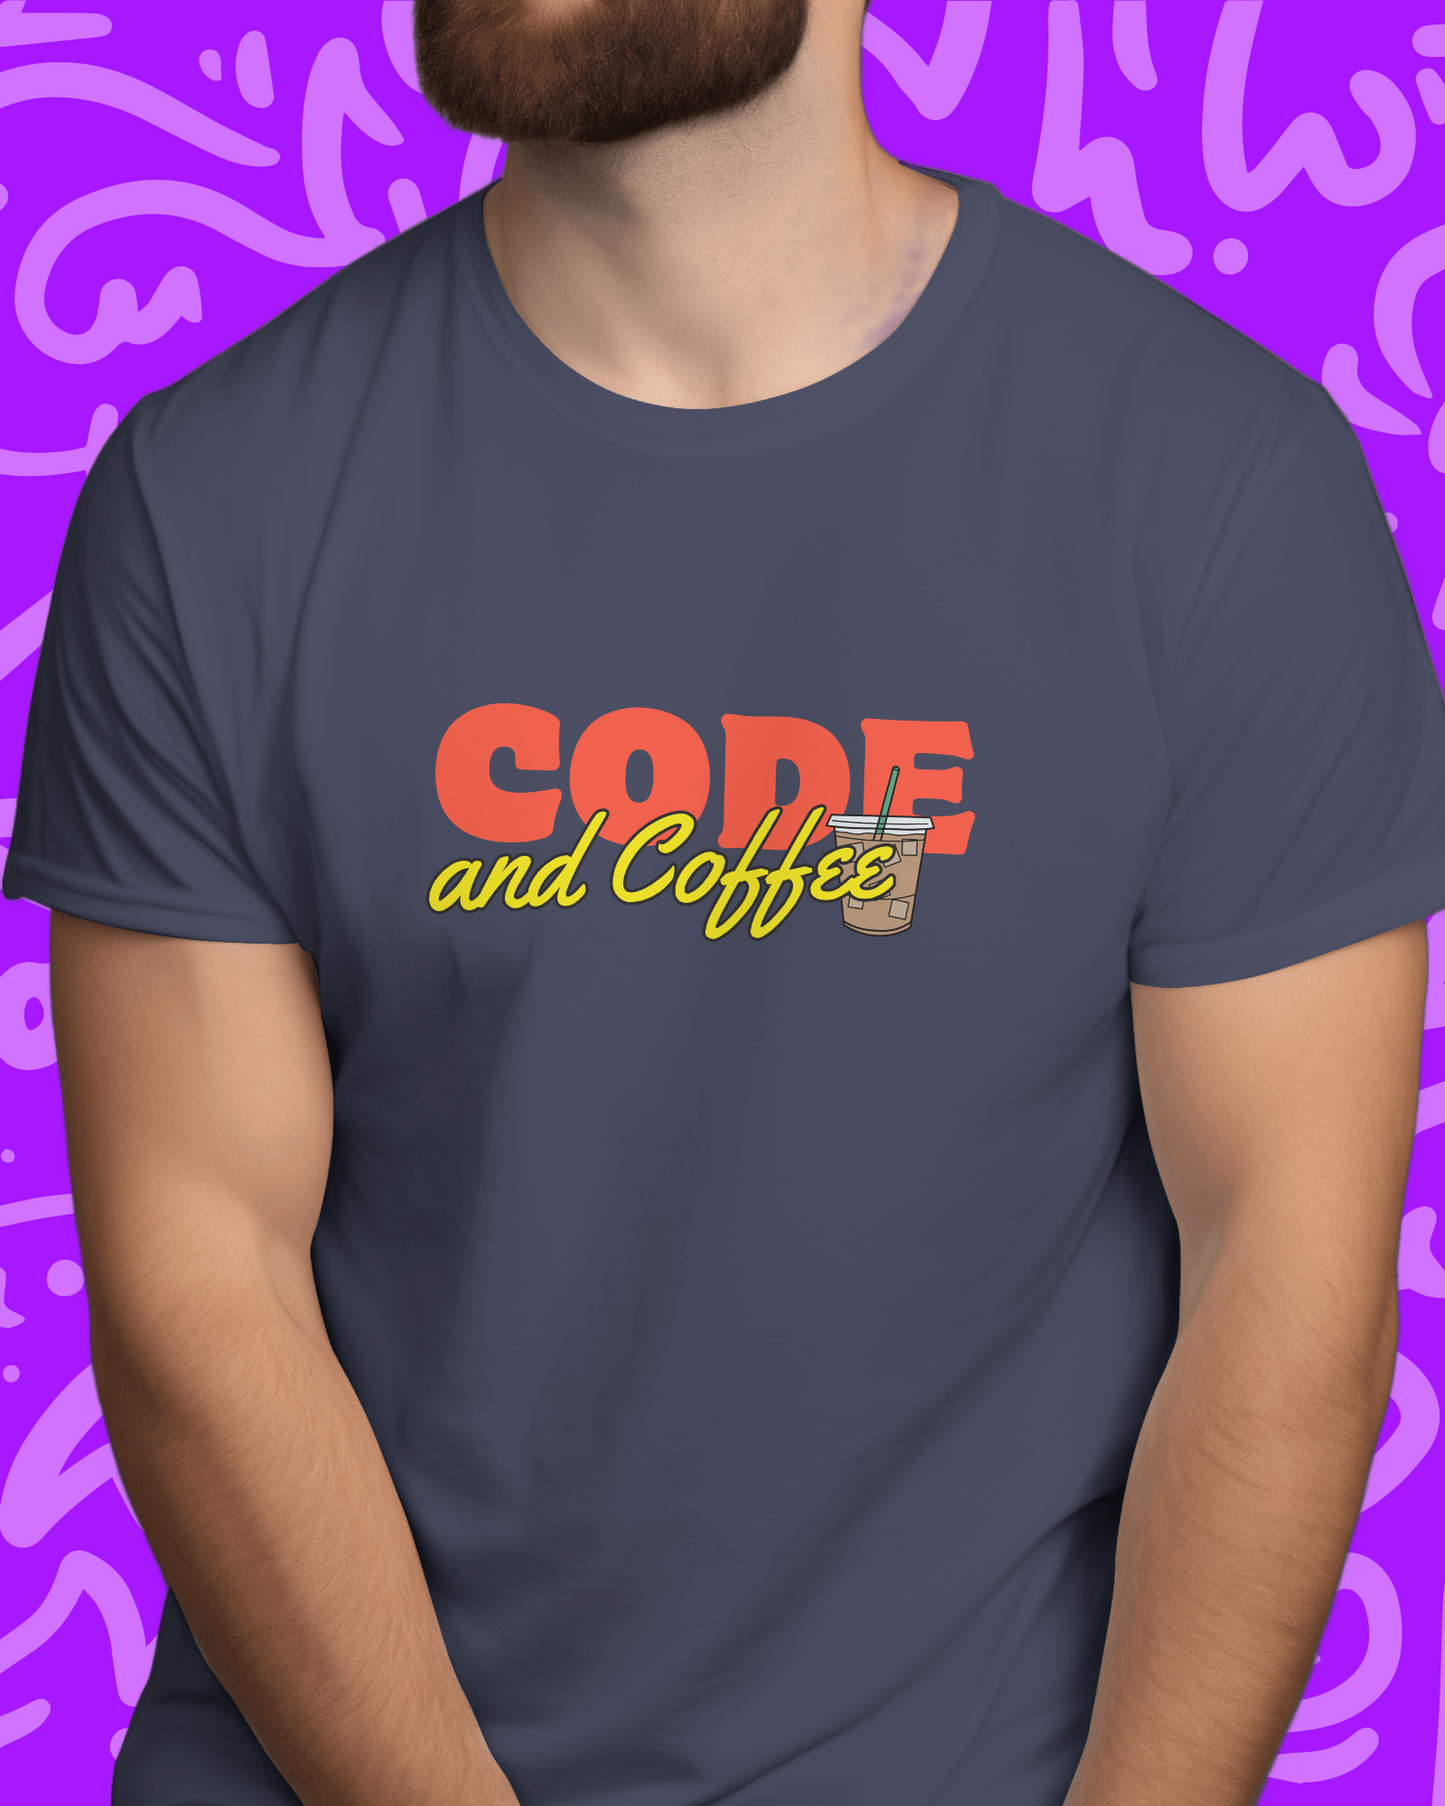 Sarcastic Coder T-Shirt | Code and Coffee